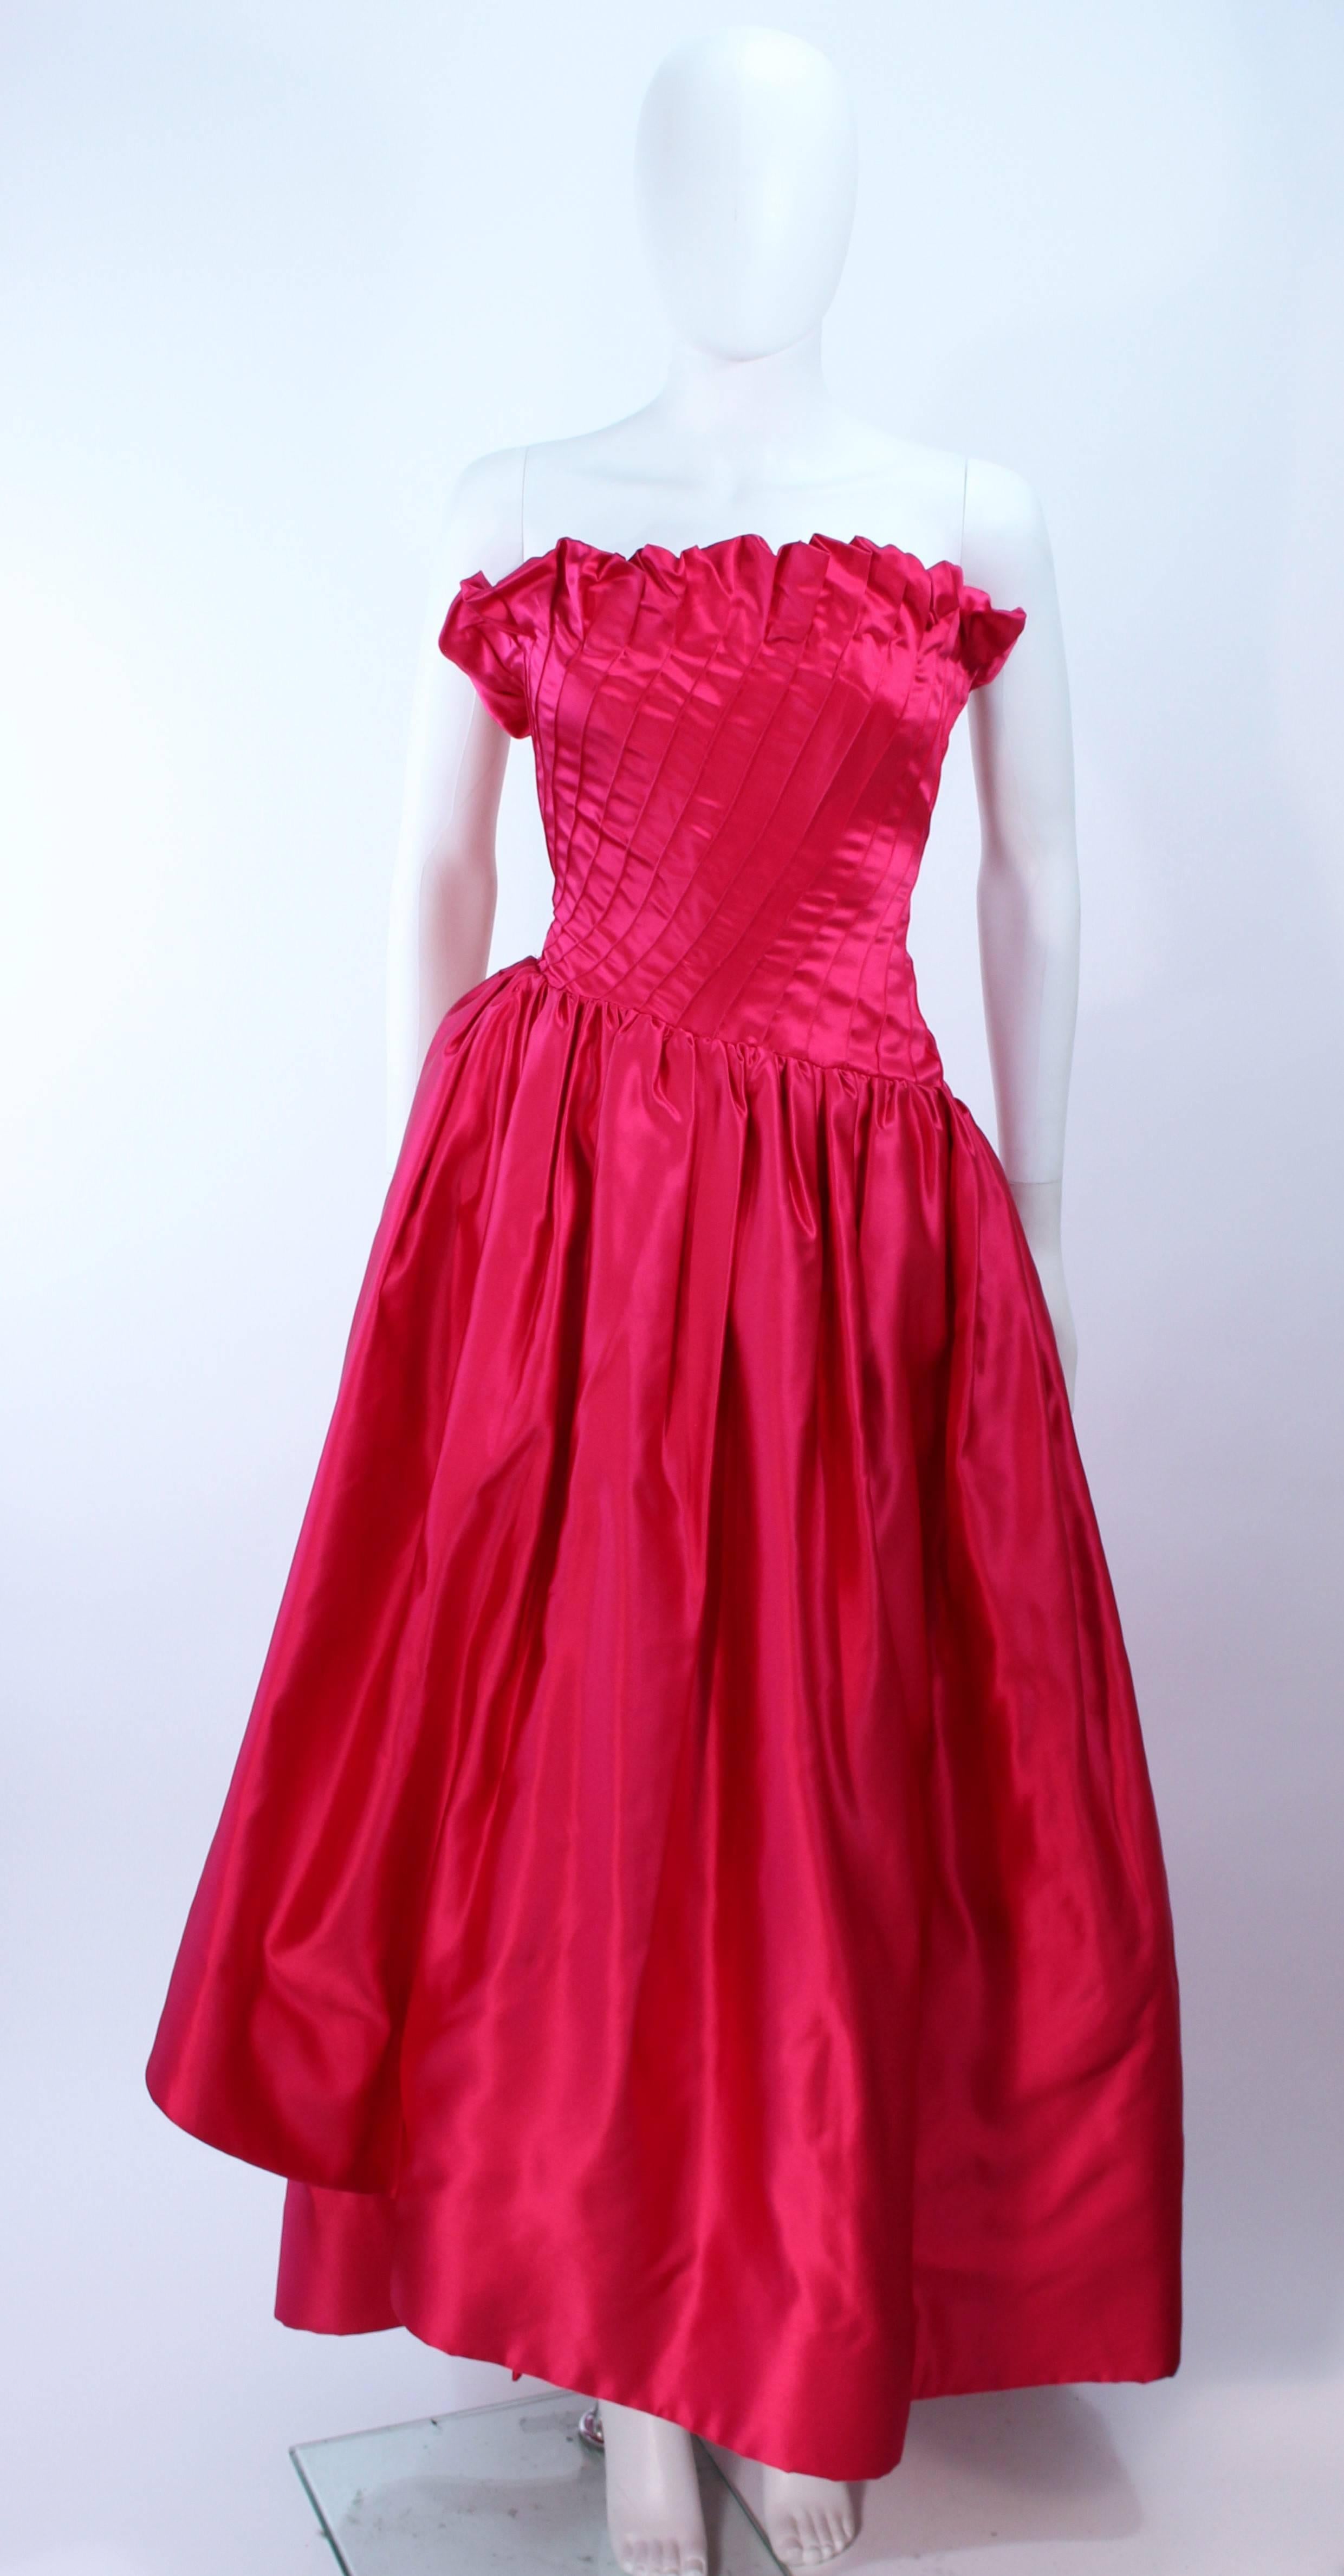 This Arnold Scaasi gown is composed of a fuchsia silk with a pintuck and draped design. Features a ruffled edge at the bust. There is a zipper closure with interior boning. In excellent vintage condition.

**Please cross-reference measurements for